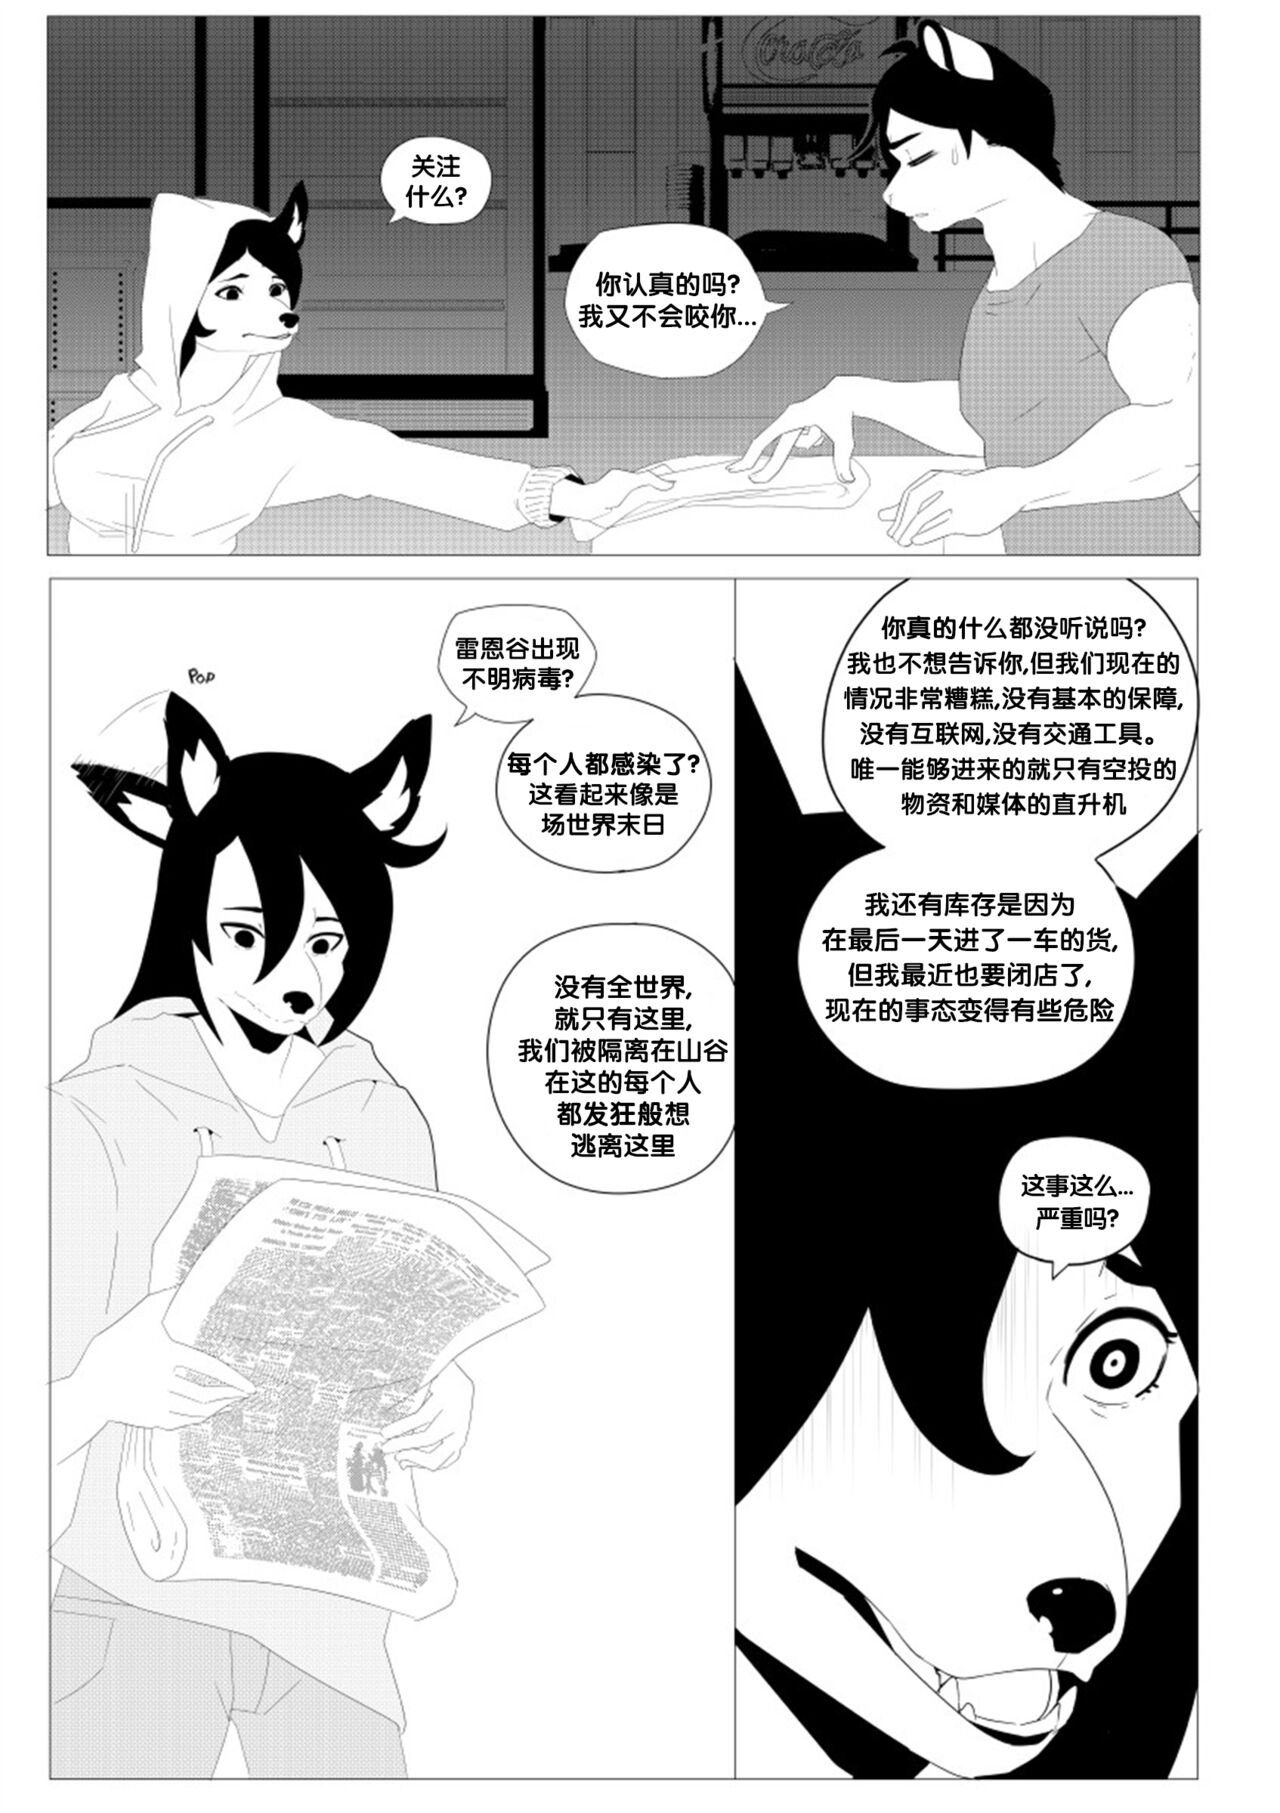 [Corablue] The Cell CH1 [Ongoing] [Chinese] [梅水瓶汉化] 